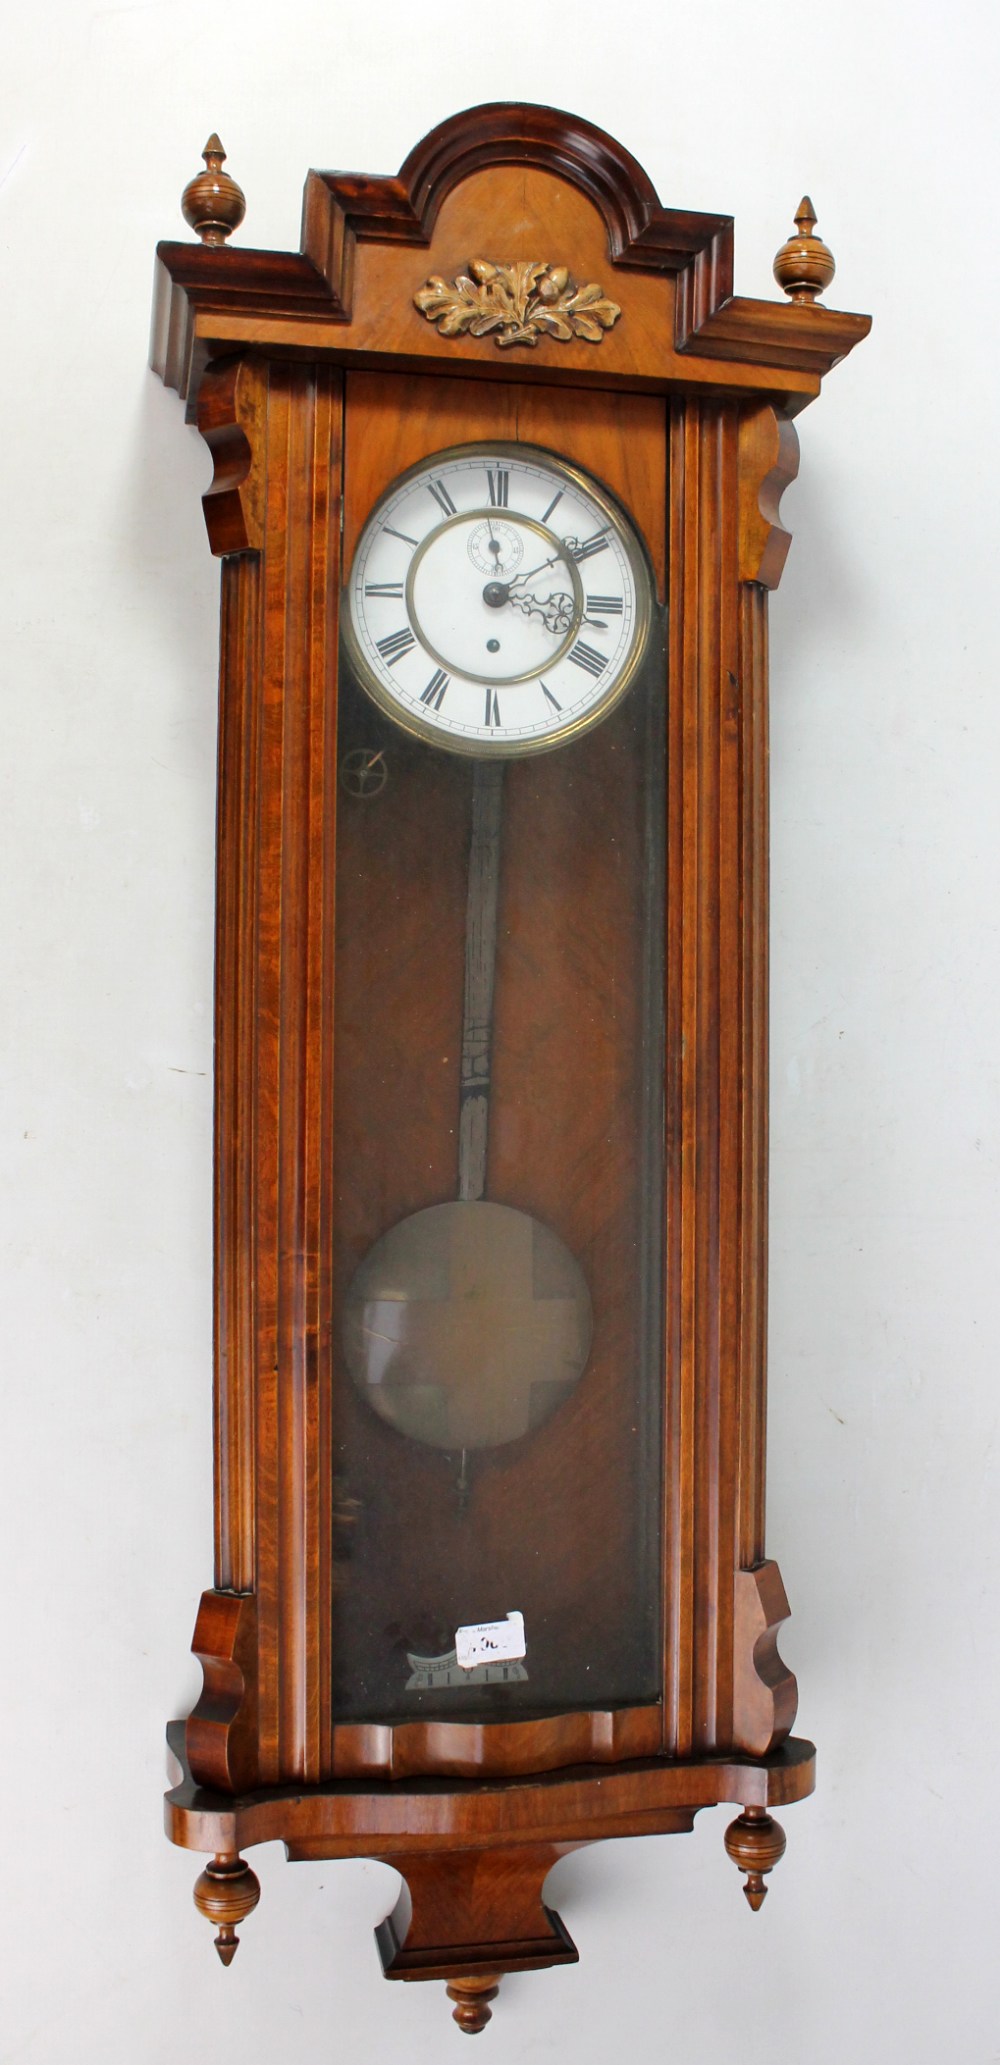 A circa 1900 walnut and beech Vienna style wall clock with two-piece white enamel dial set with